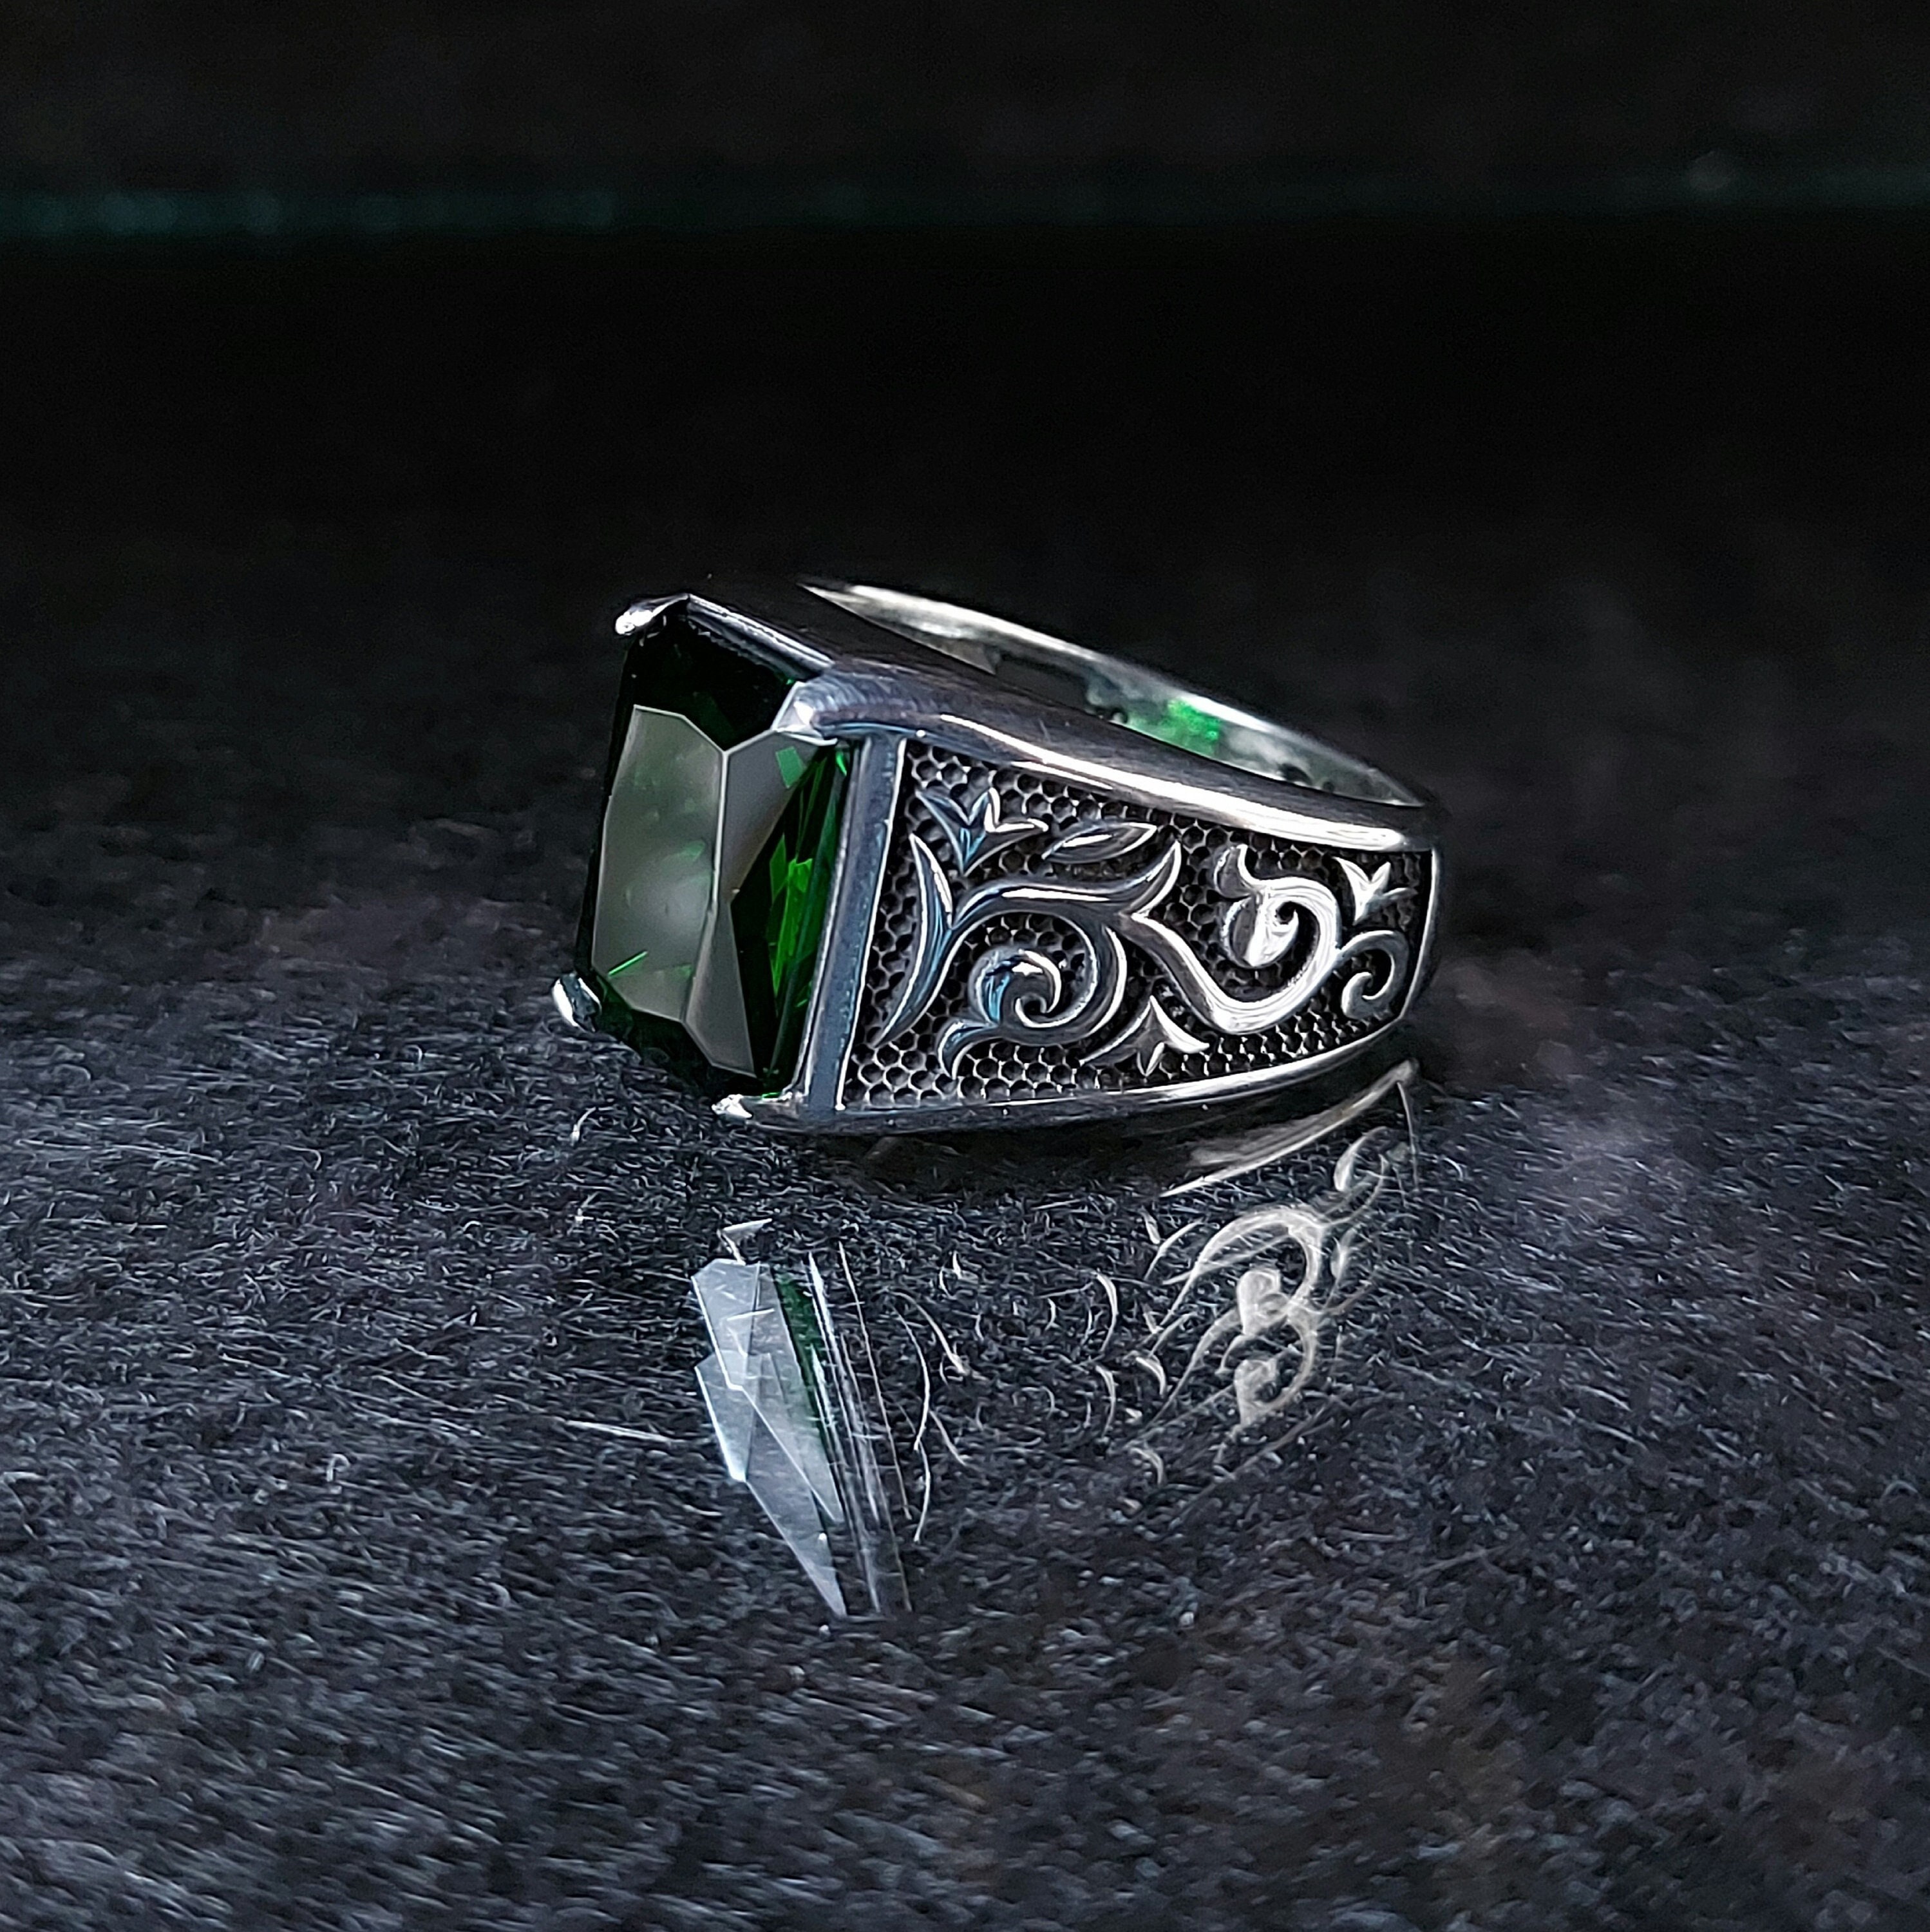 Real Emerald Stone Ring Natural Emerald Stone Ring From Swat Genuine Zamurd Stone  Ring Real Original Zamurd Stone Ring 925 Sterling Silver - Etsy | Stone  rings natural, Emerald stone rings, Emerald stone